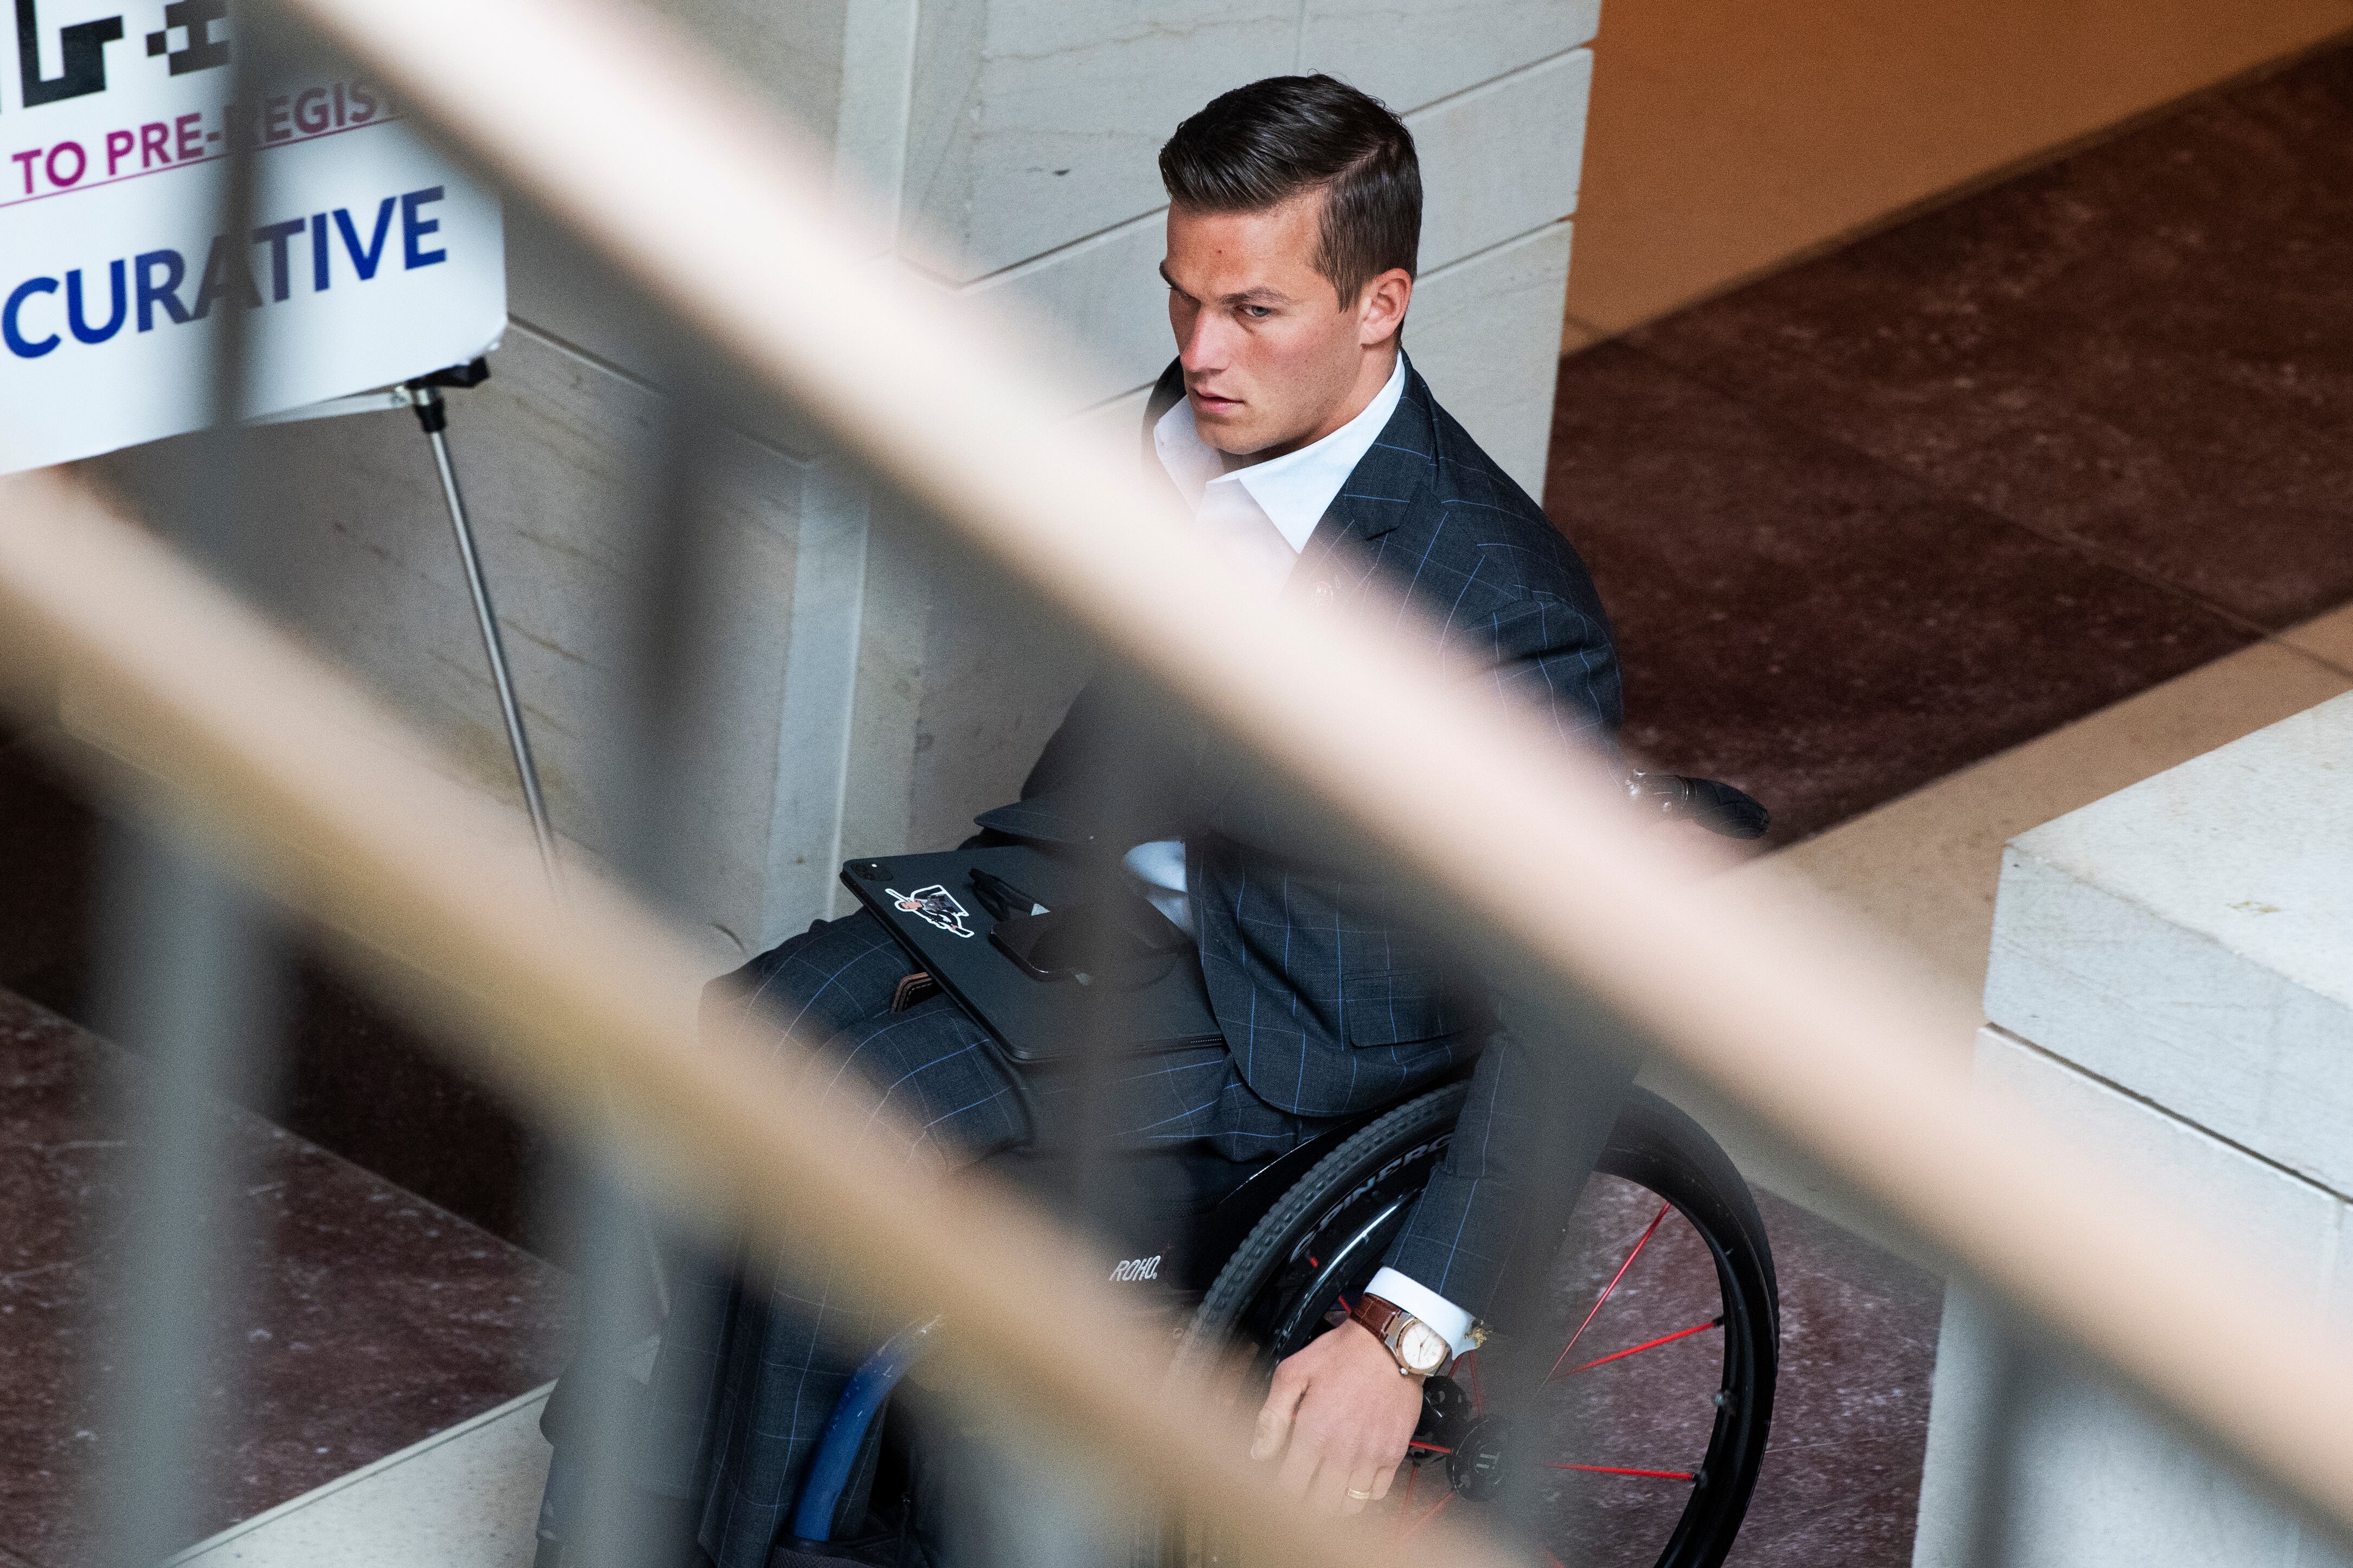 Madison Cawthorn, wearing a suit and moving his wheelchair down a hallway, viewed from above through the railing bars of a nearby staircase